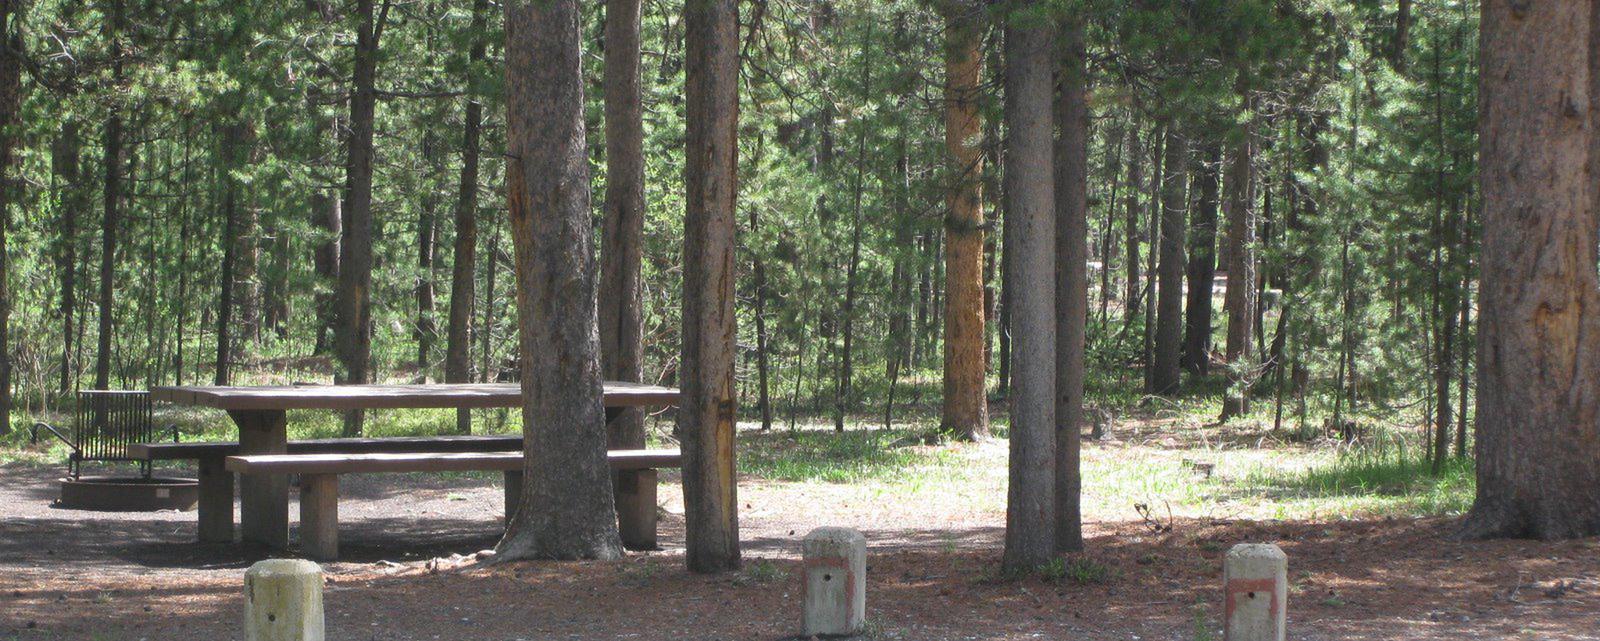 Site B16, surrounded by pine trees, picnic table & fire ringSite B16